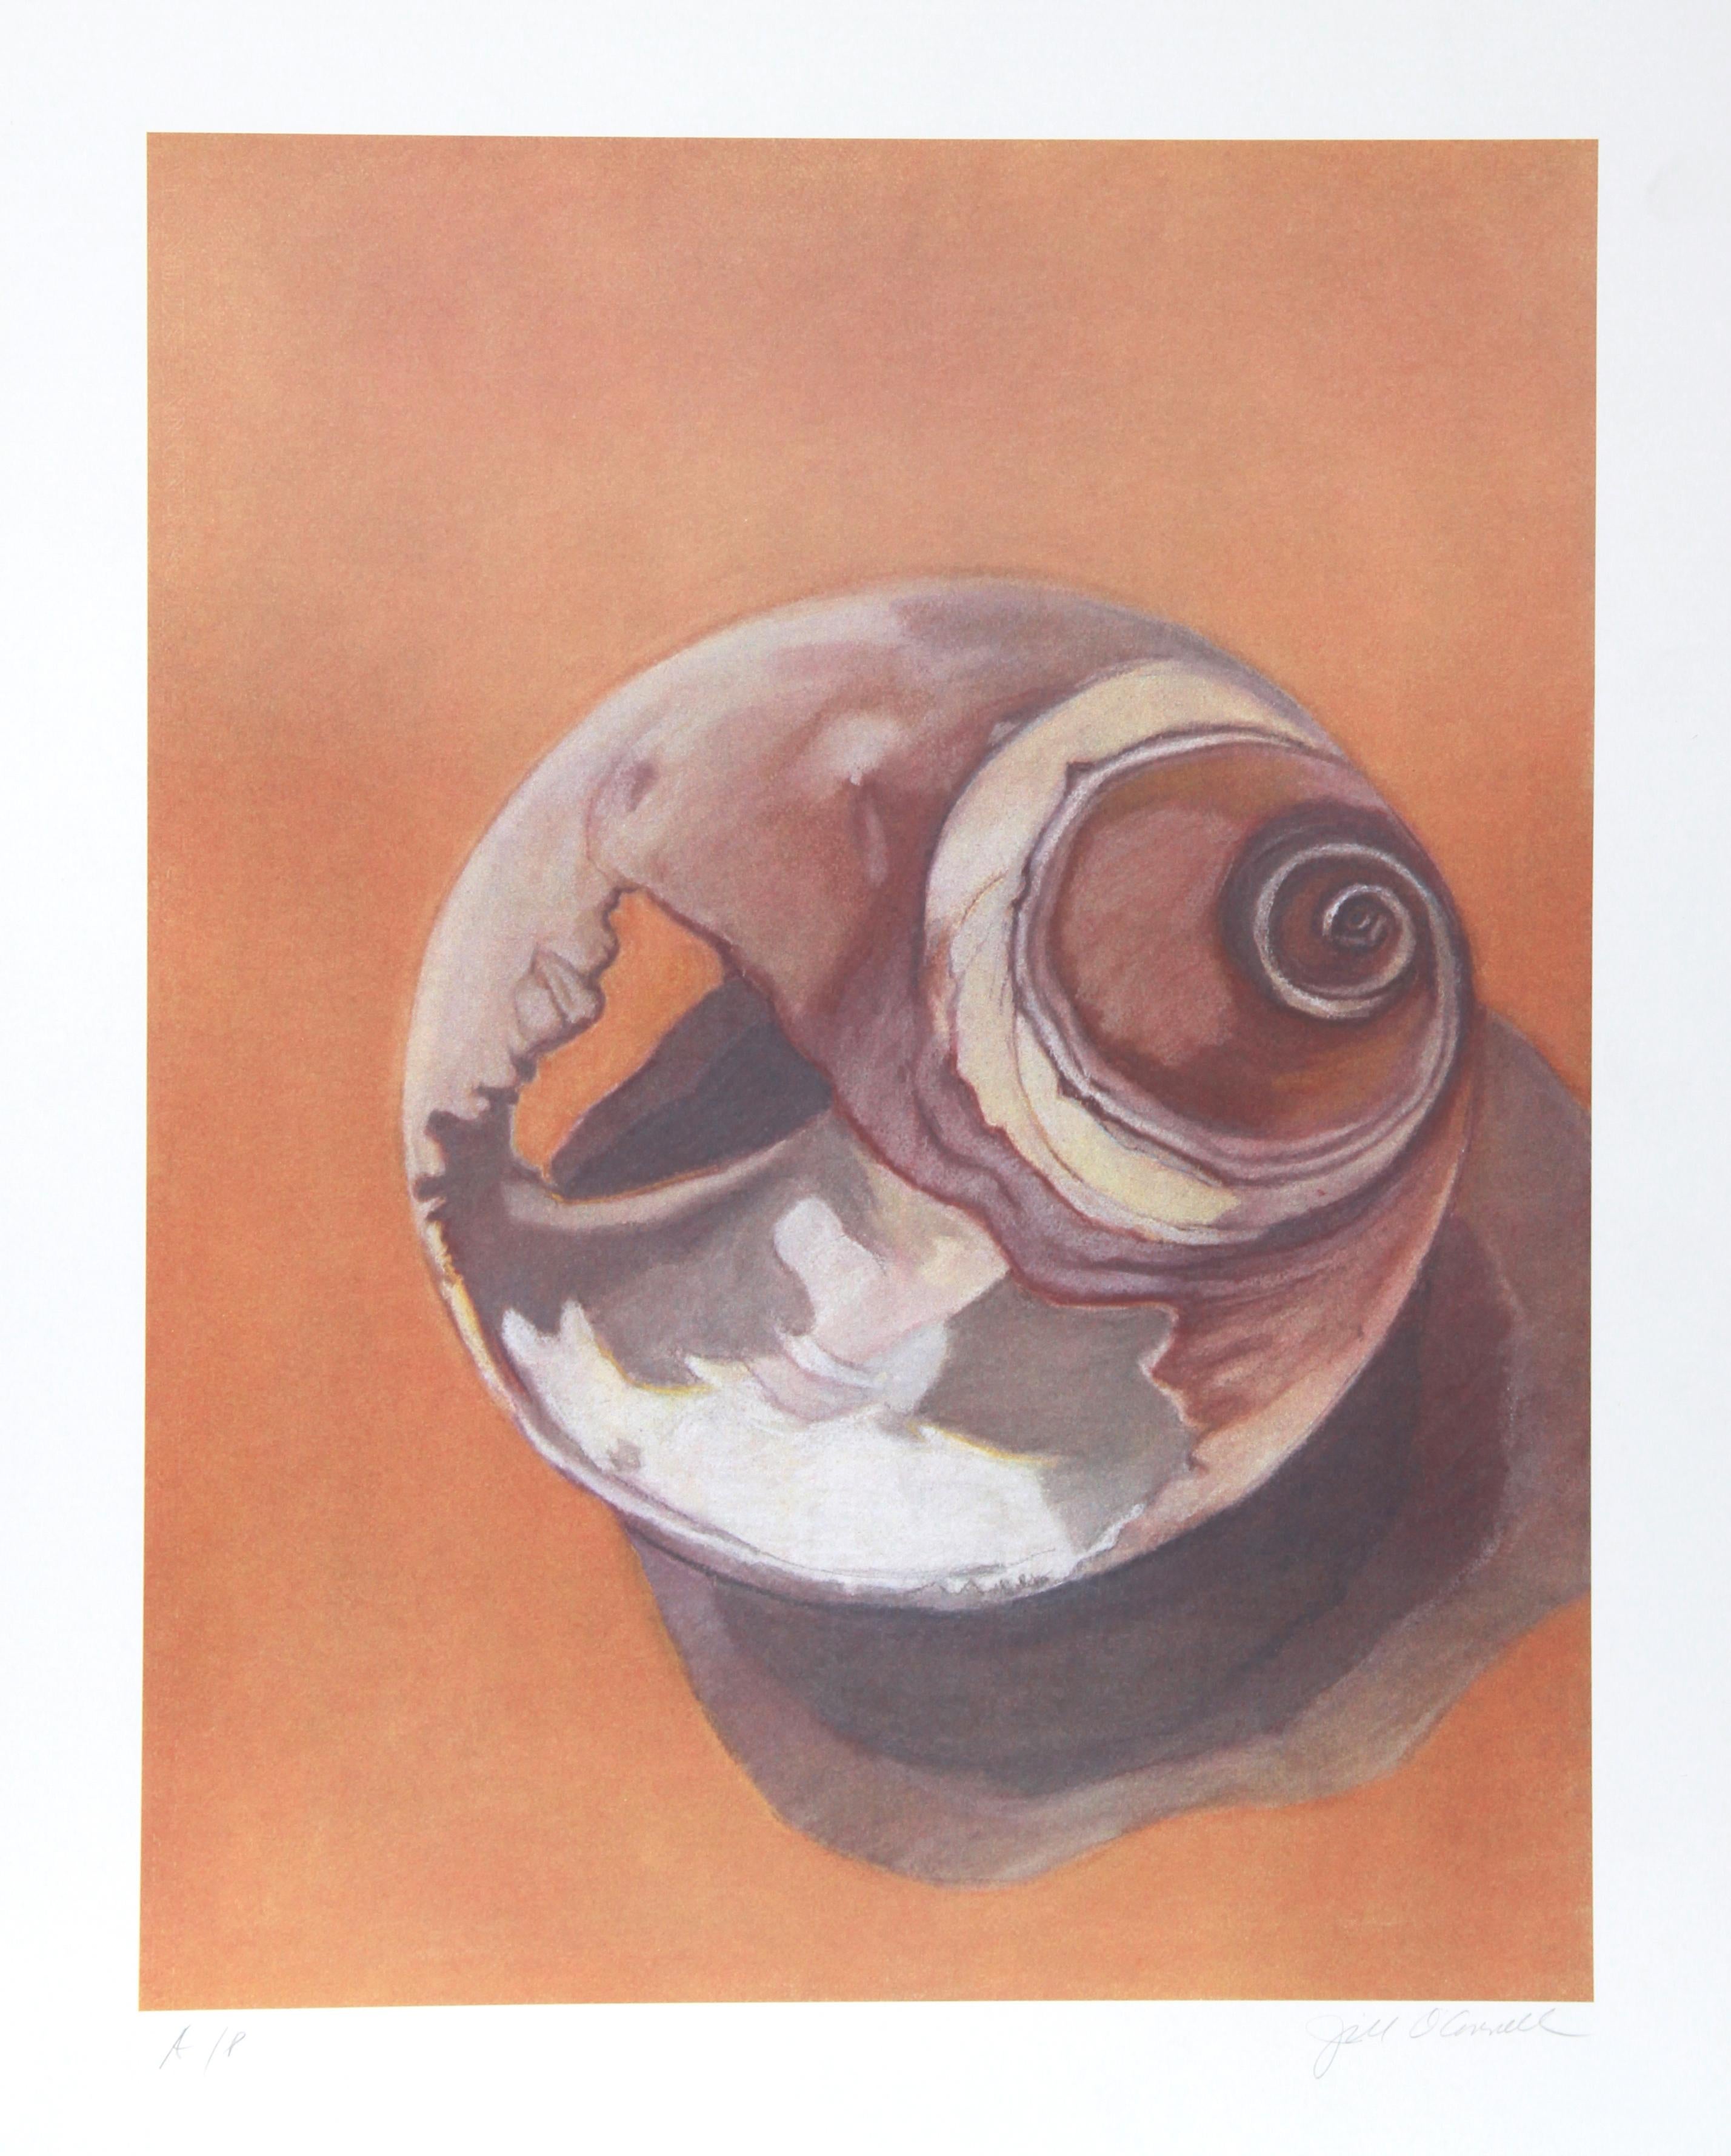 Moon Shell
Jill O’Connell
Date: circa 1980
Lithograph, signed and numbered in pencil
Edition of 500, AP
Image Size: 24.5 x 19 inches
Size: 29.5 in. x 23 in. (74.93 cm x 58.42 cm)